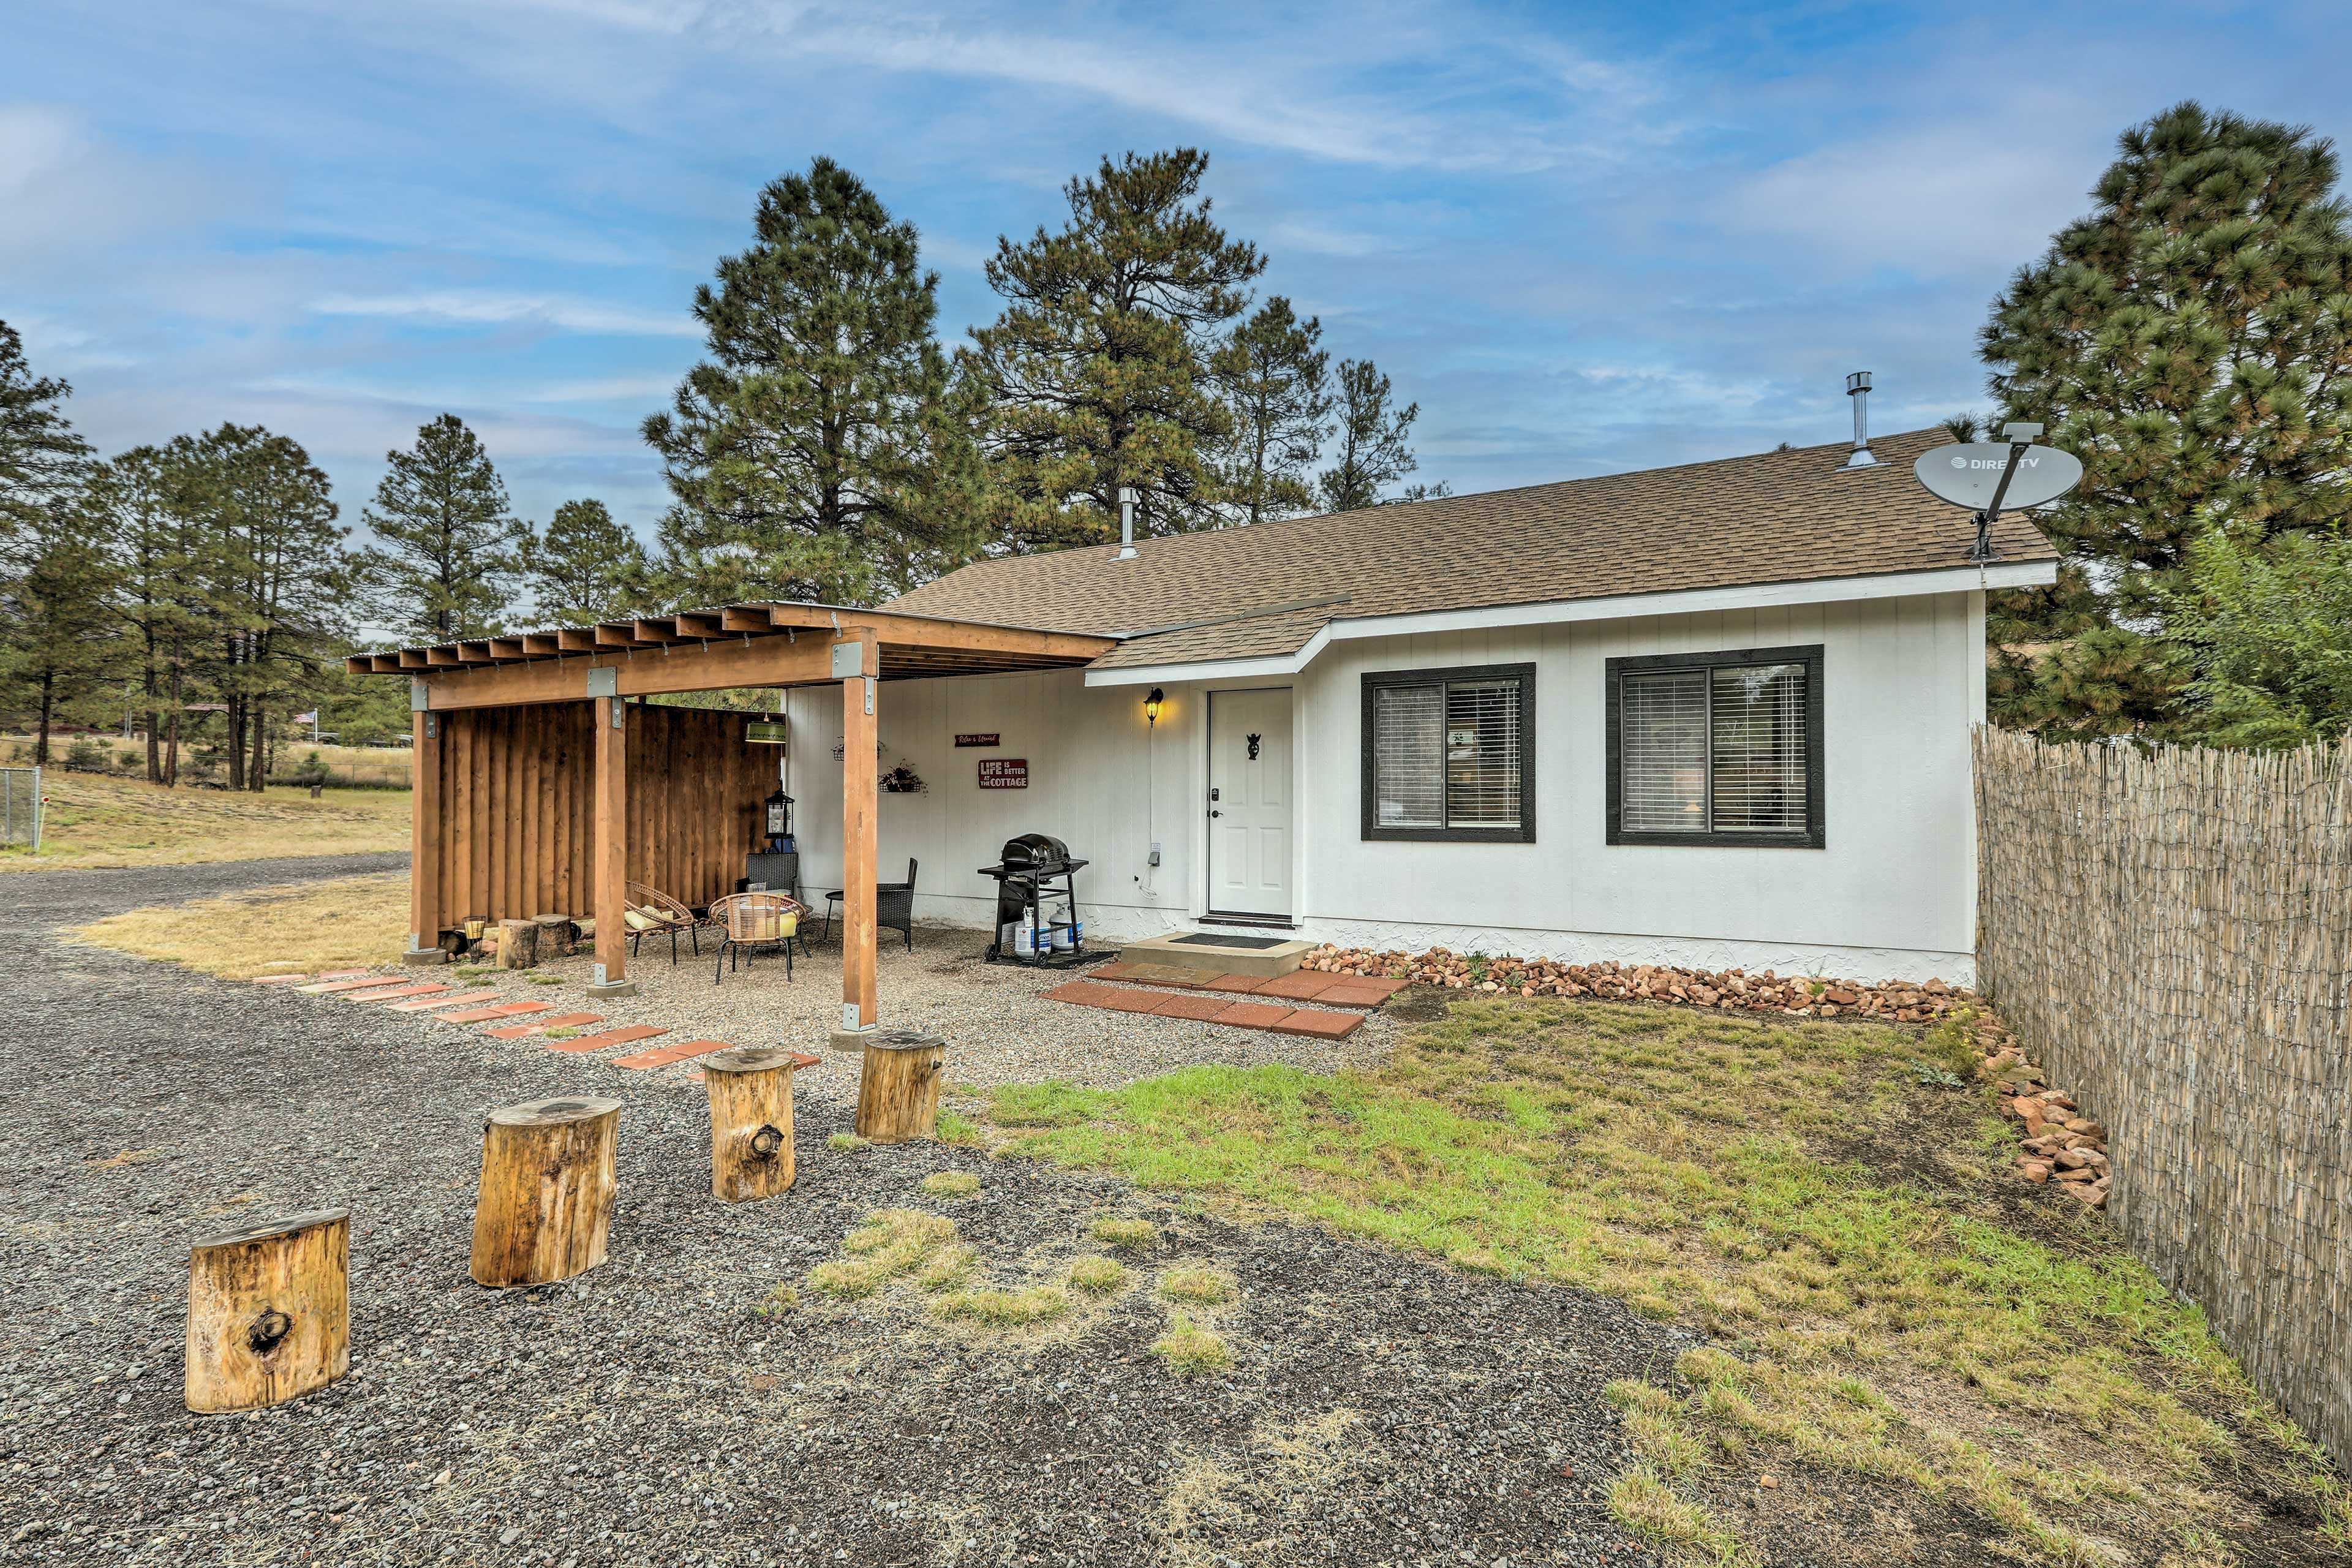 Flagstaff Vacation Rental Home | 2BR | 1BA | 920 Sq Ft | No Stairs Home Exterior